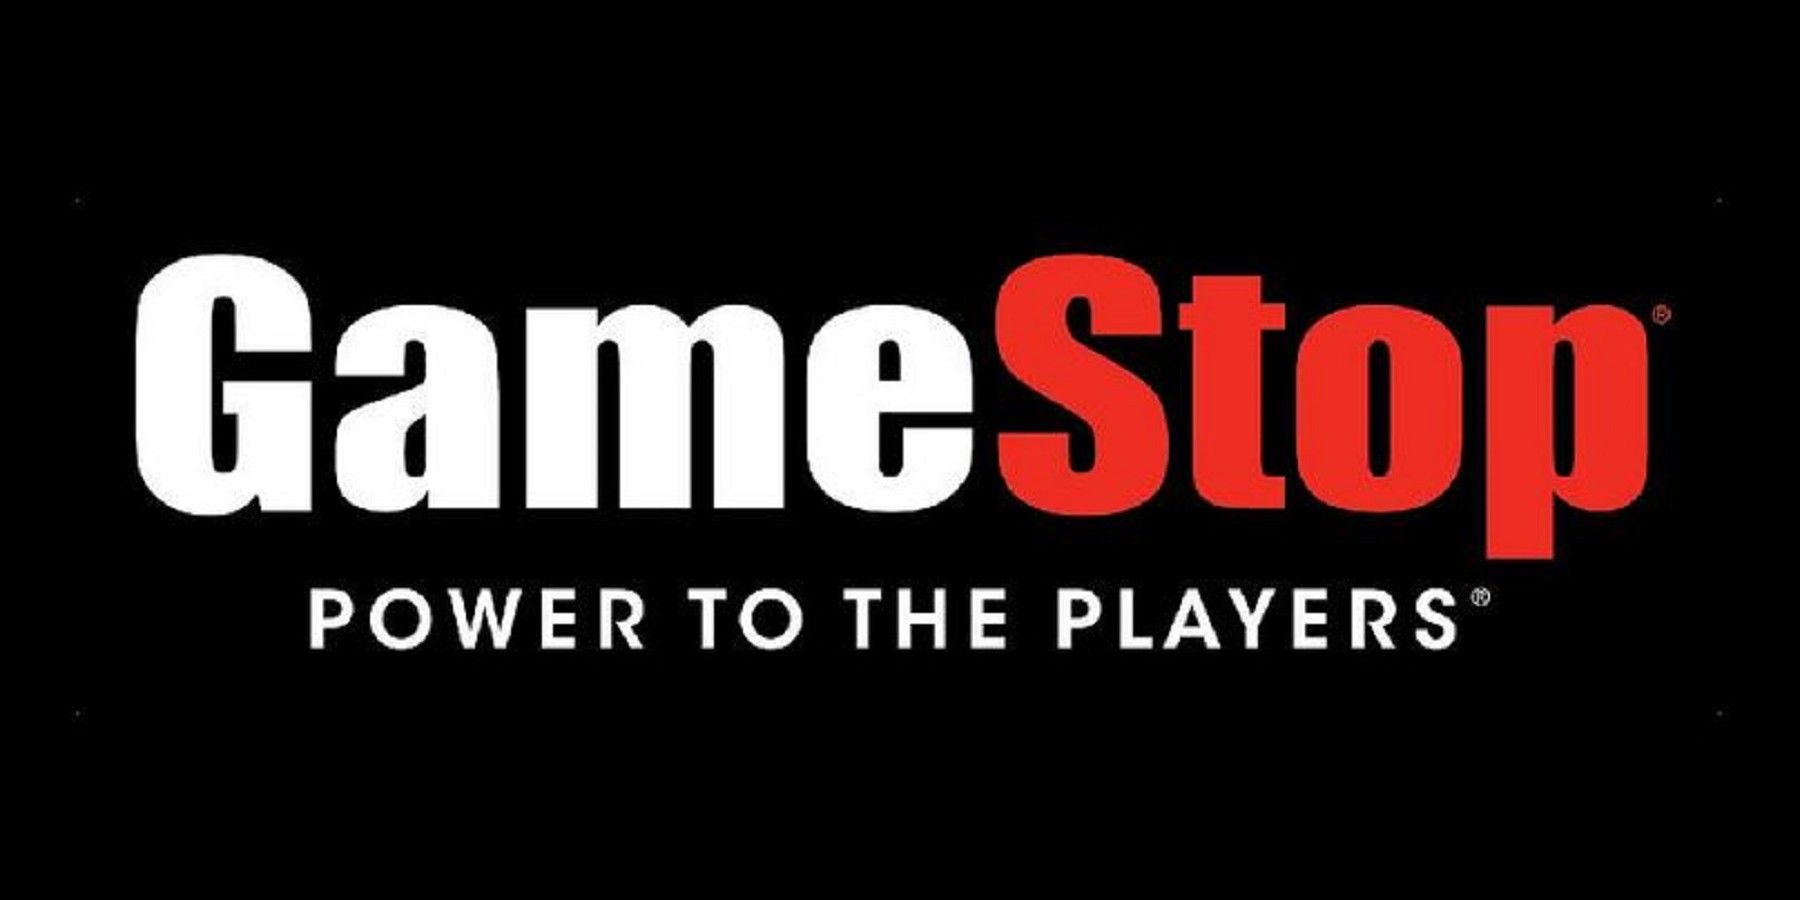 GameStop - PC gamers, this one's for you! Save up to 75% on select PlayStation  Studios PC Games. Don't miss this deal:  #GameStop # PlayStation #PCGames #GamerGifts